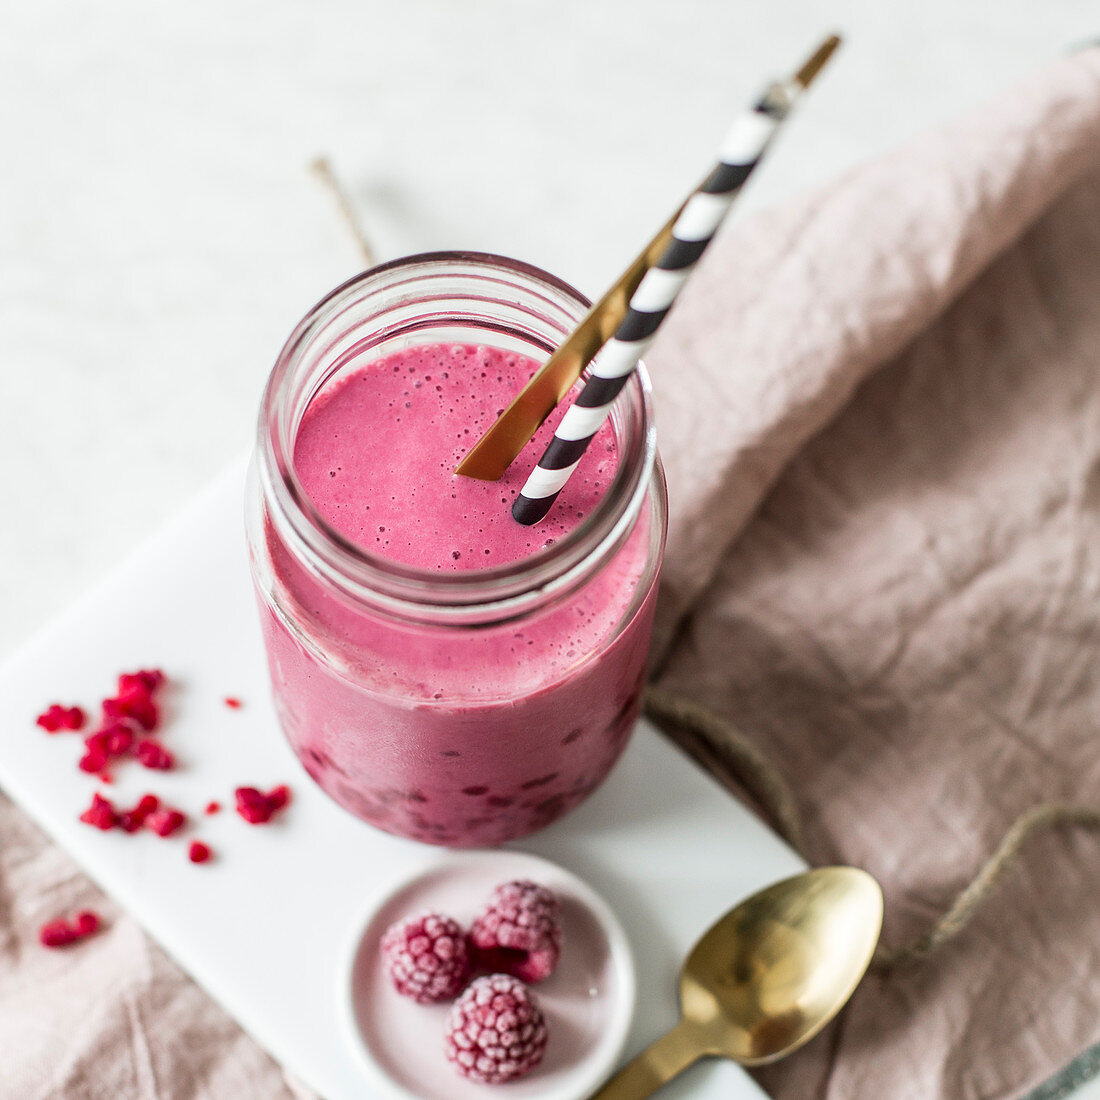 A raspberry and beetroot smoothie in a screw-top jar